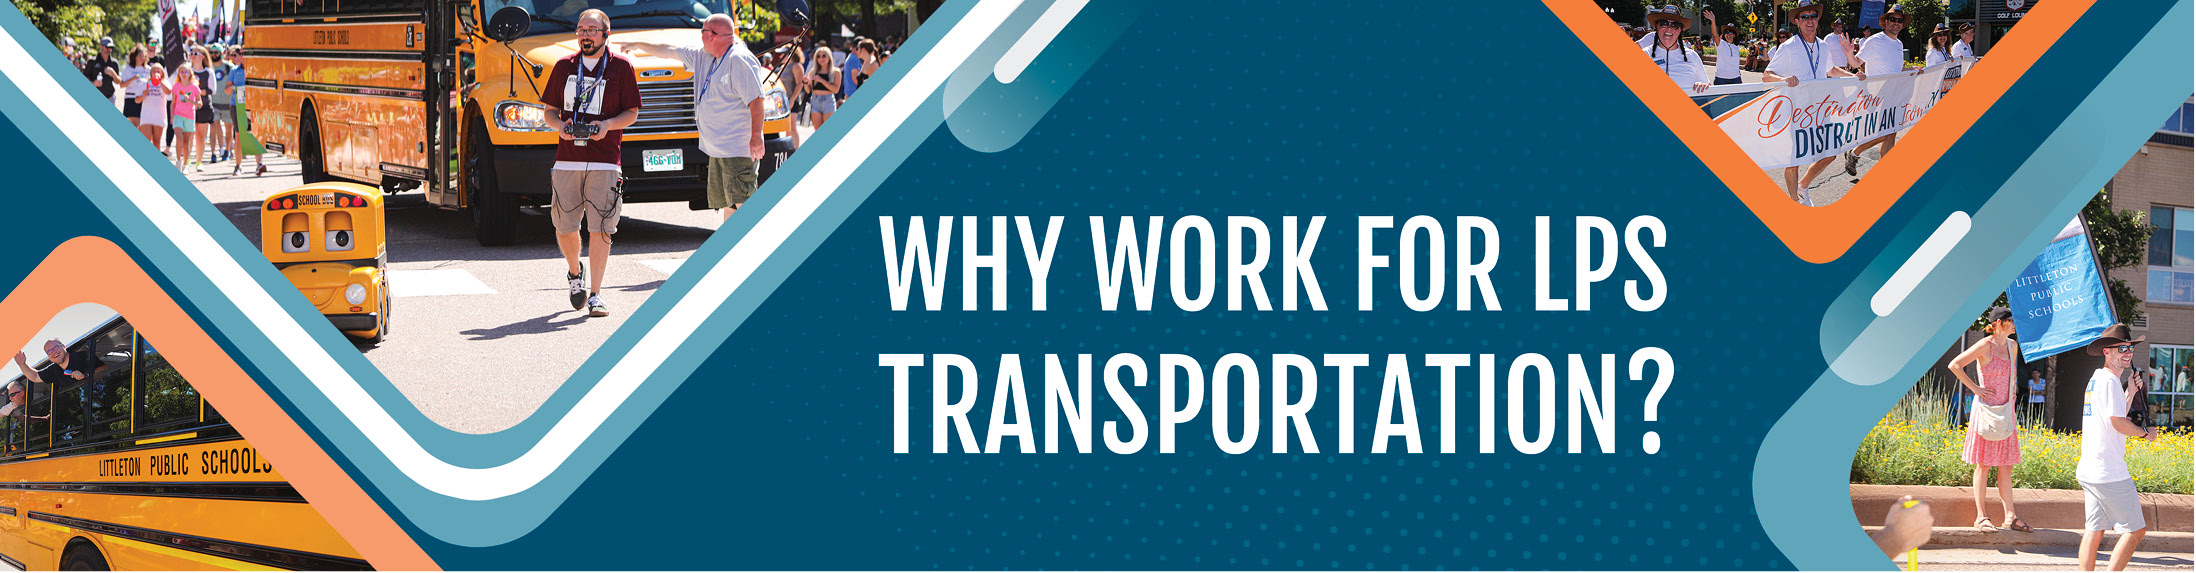 Why work for LPS Transportation? banner